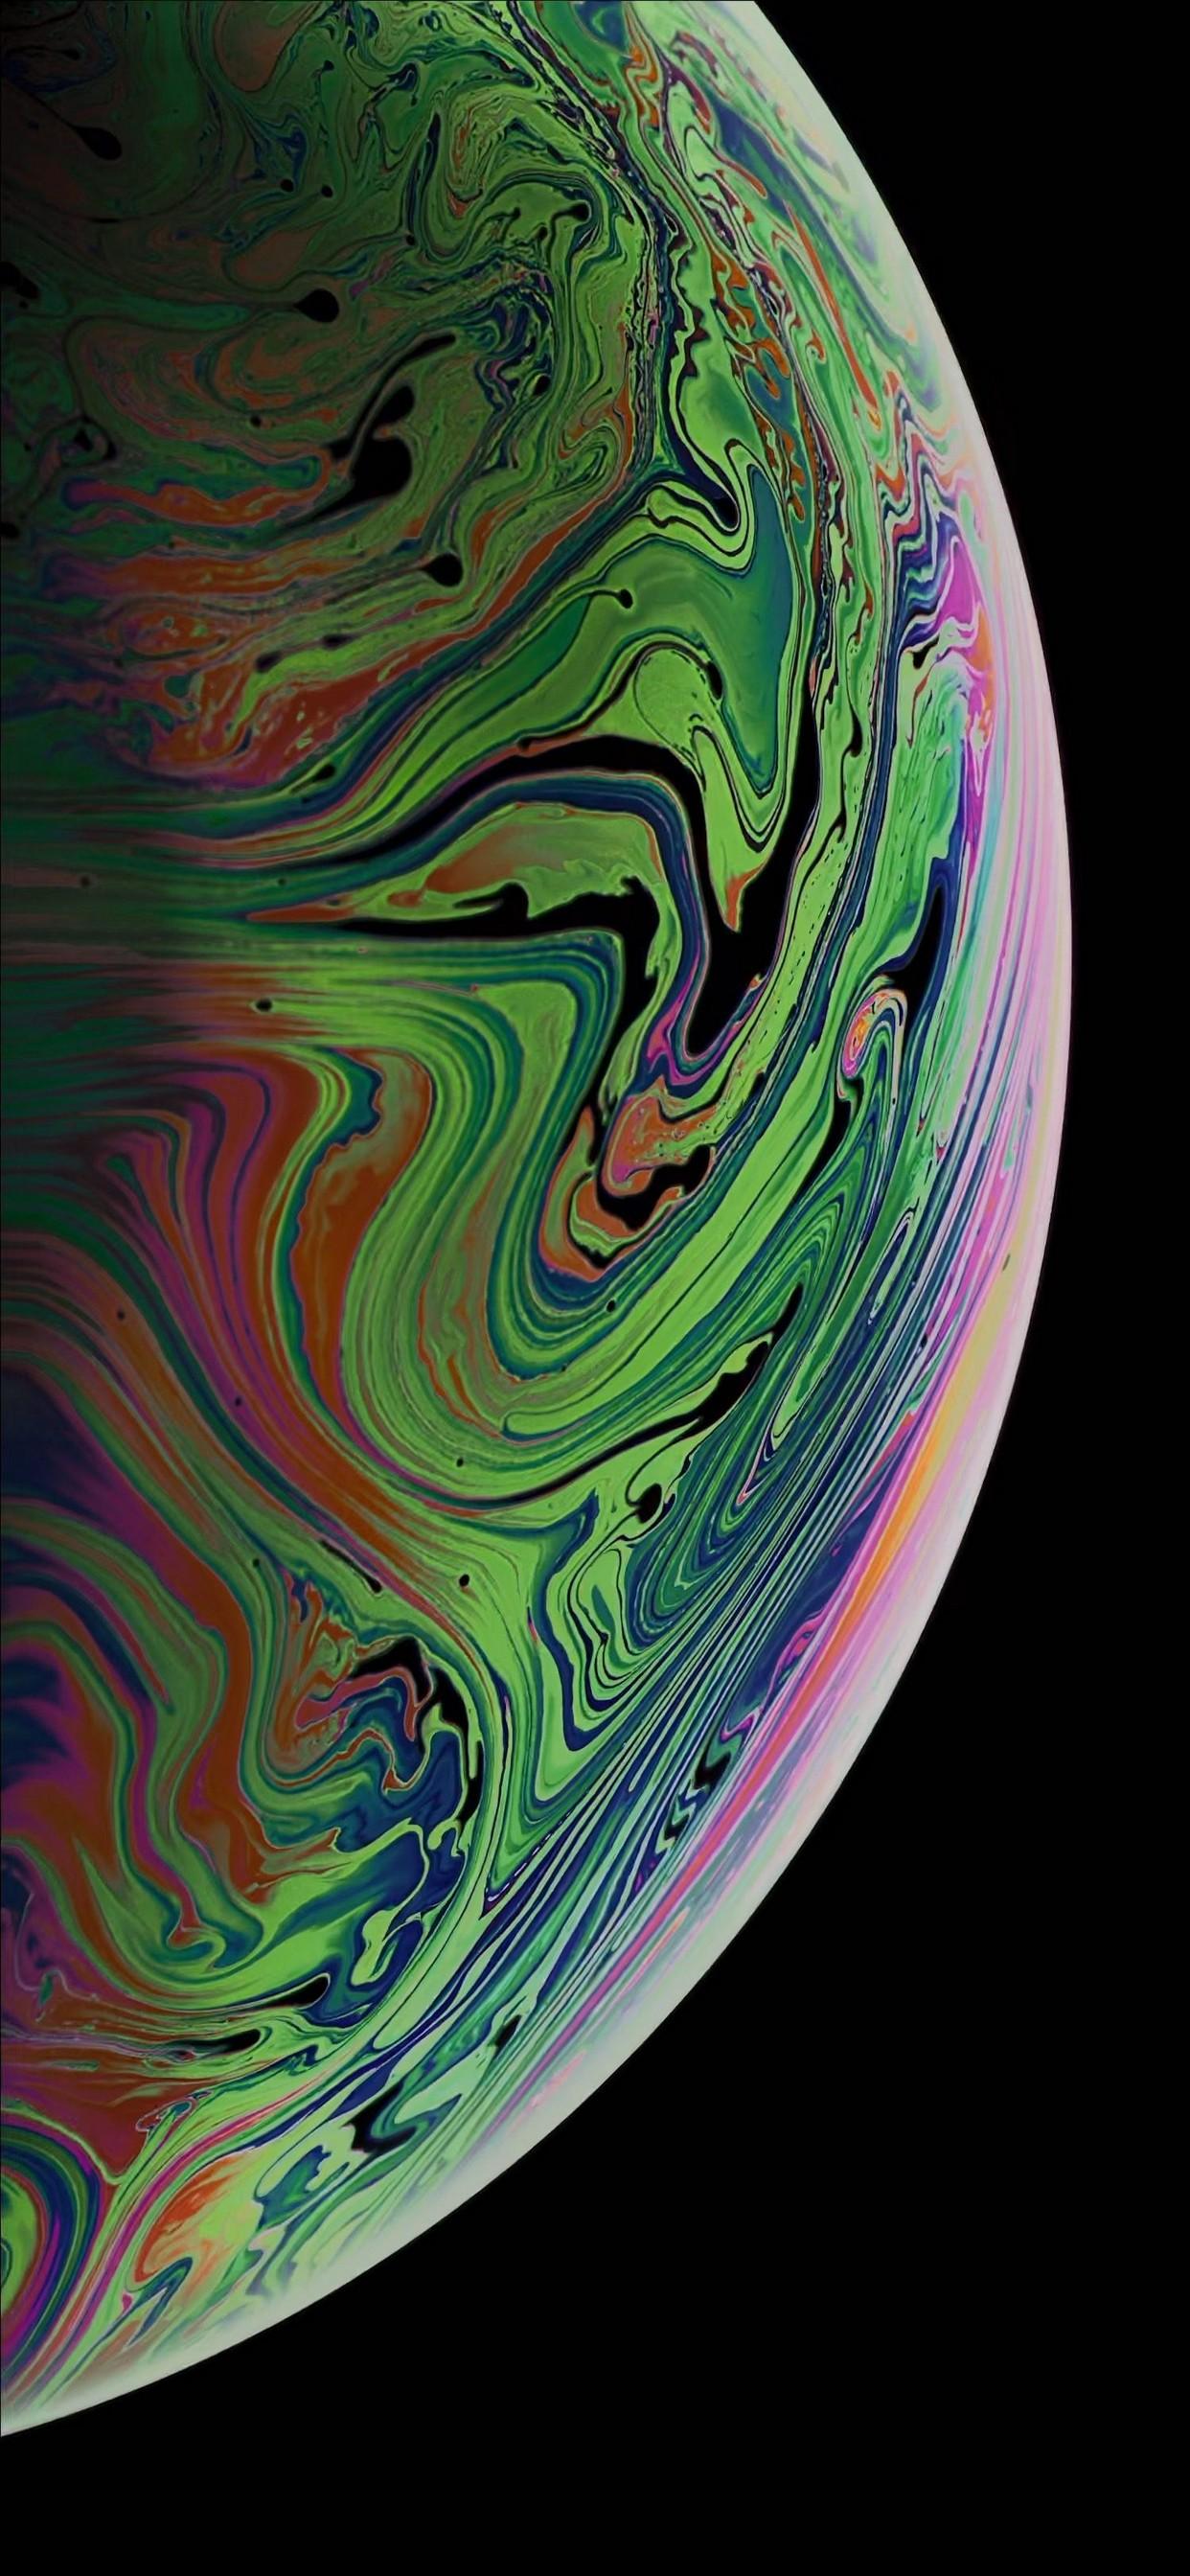 Apple iPhone X Earth Wallpapers - Wallpaper Cave